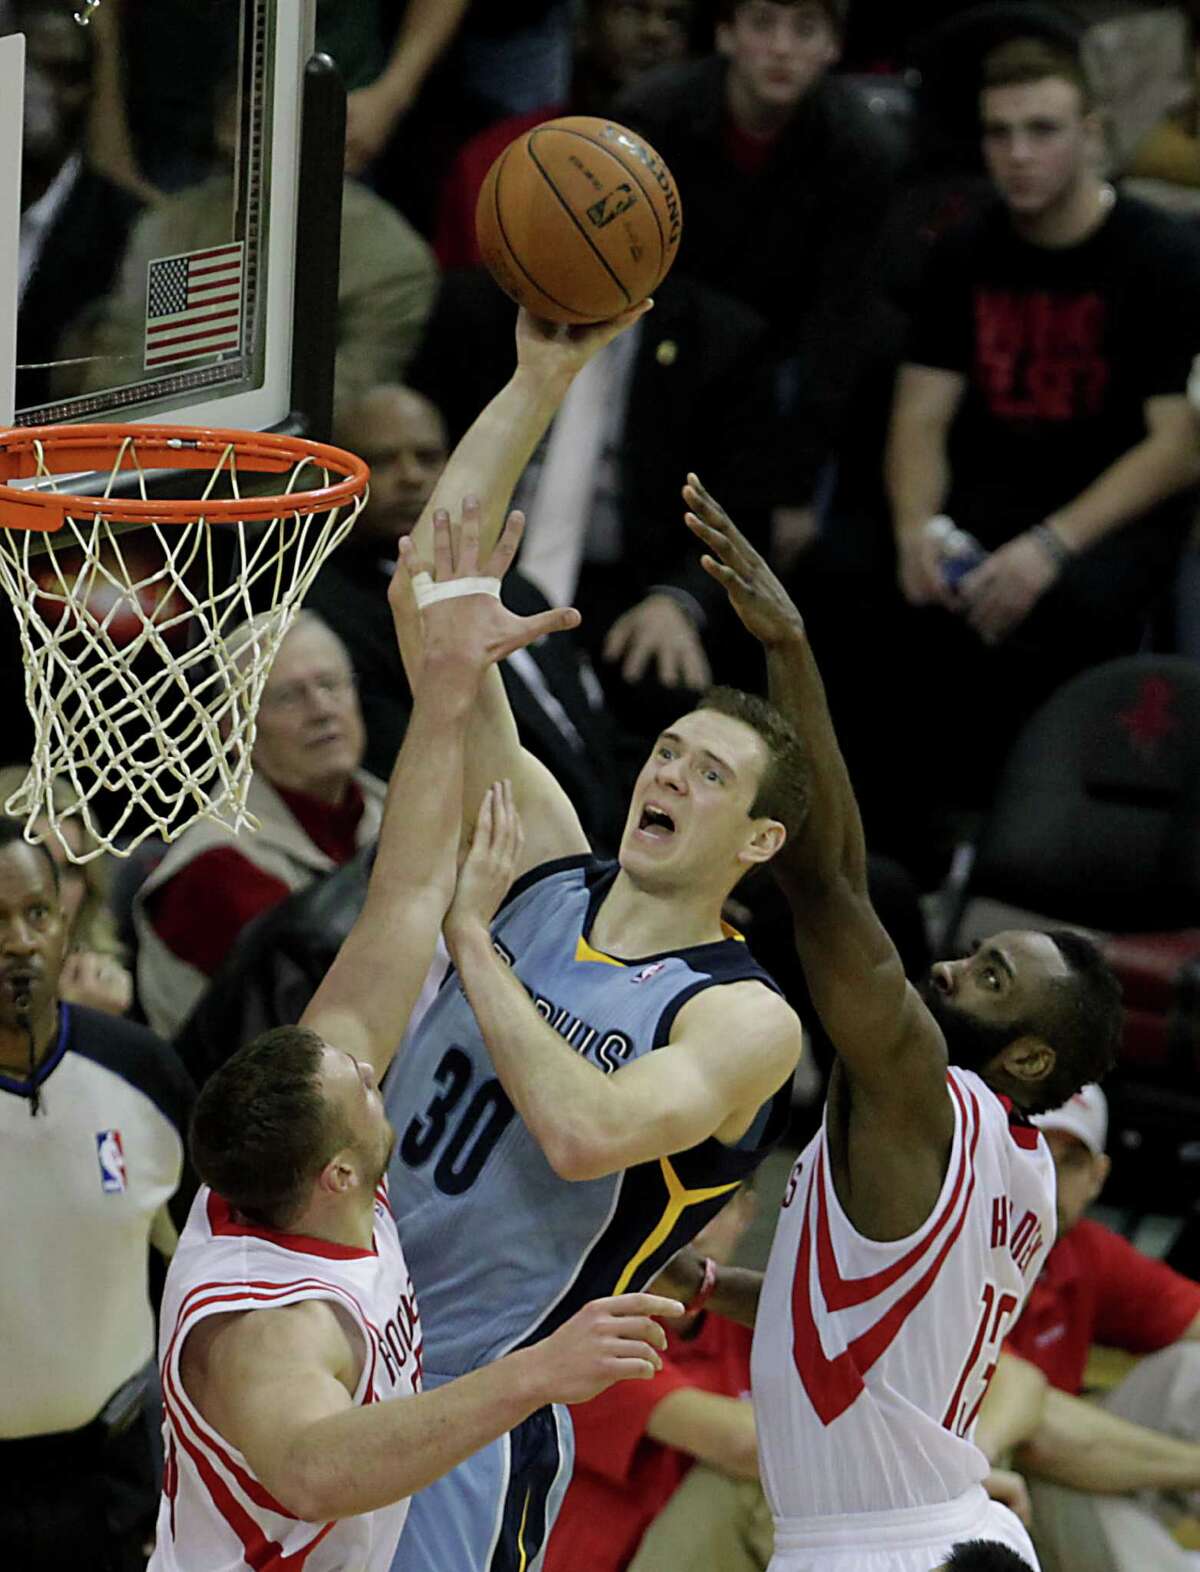 The Rockets' Donatas Motiejunas, left, and James Harden double up on the Grizzlies' Jon Leuer (30) in the second half Thursday night.